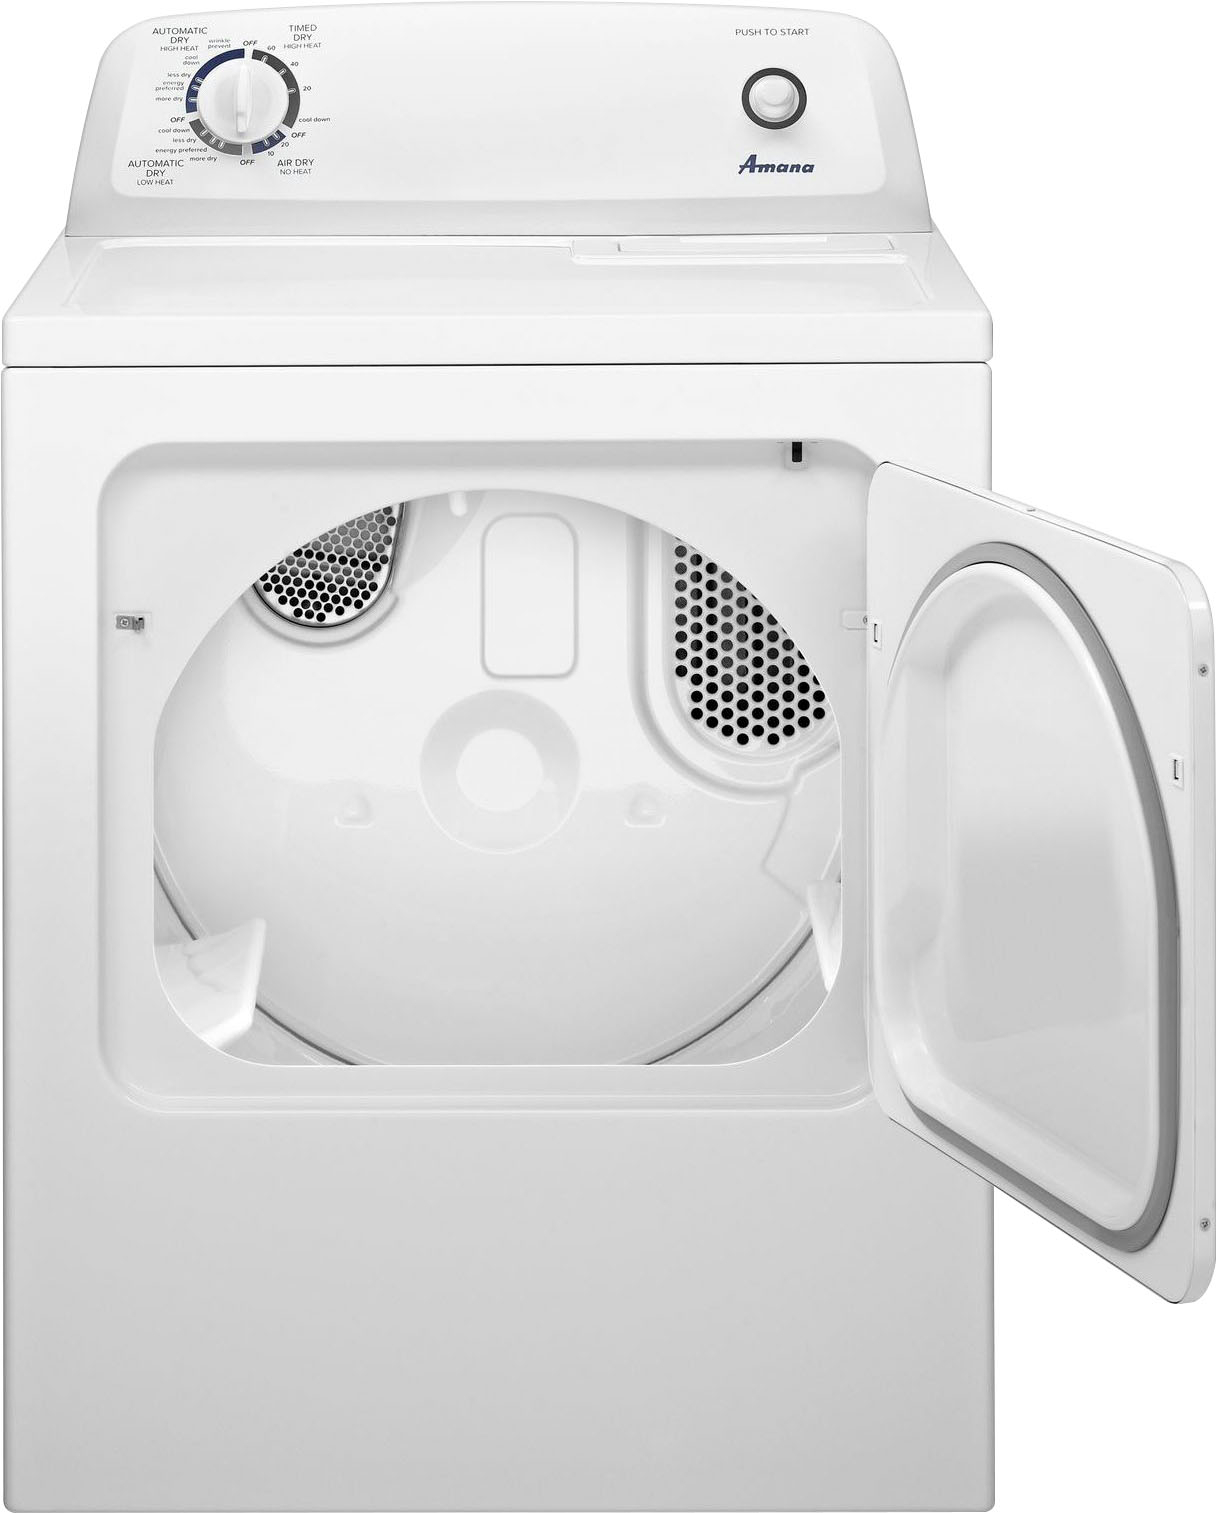 Angle View: Amana - 6.5 Cu. Ft. Gas Dryer with Automatic Dryness Control - White